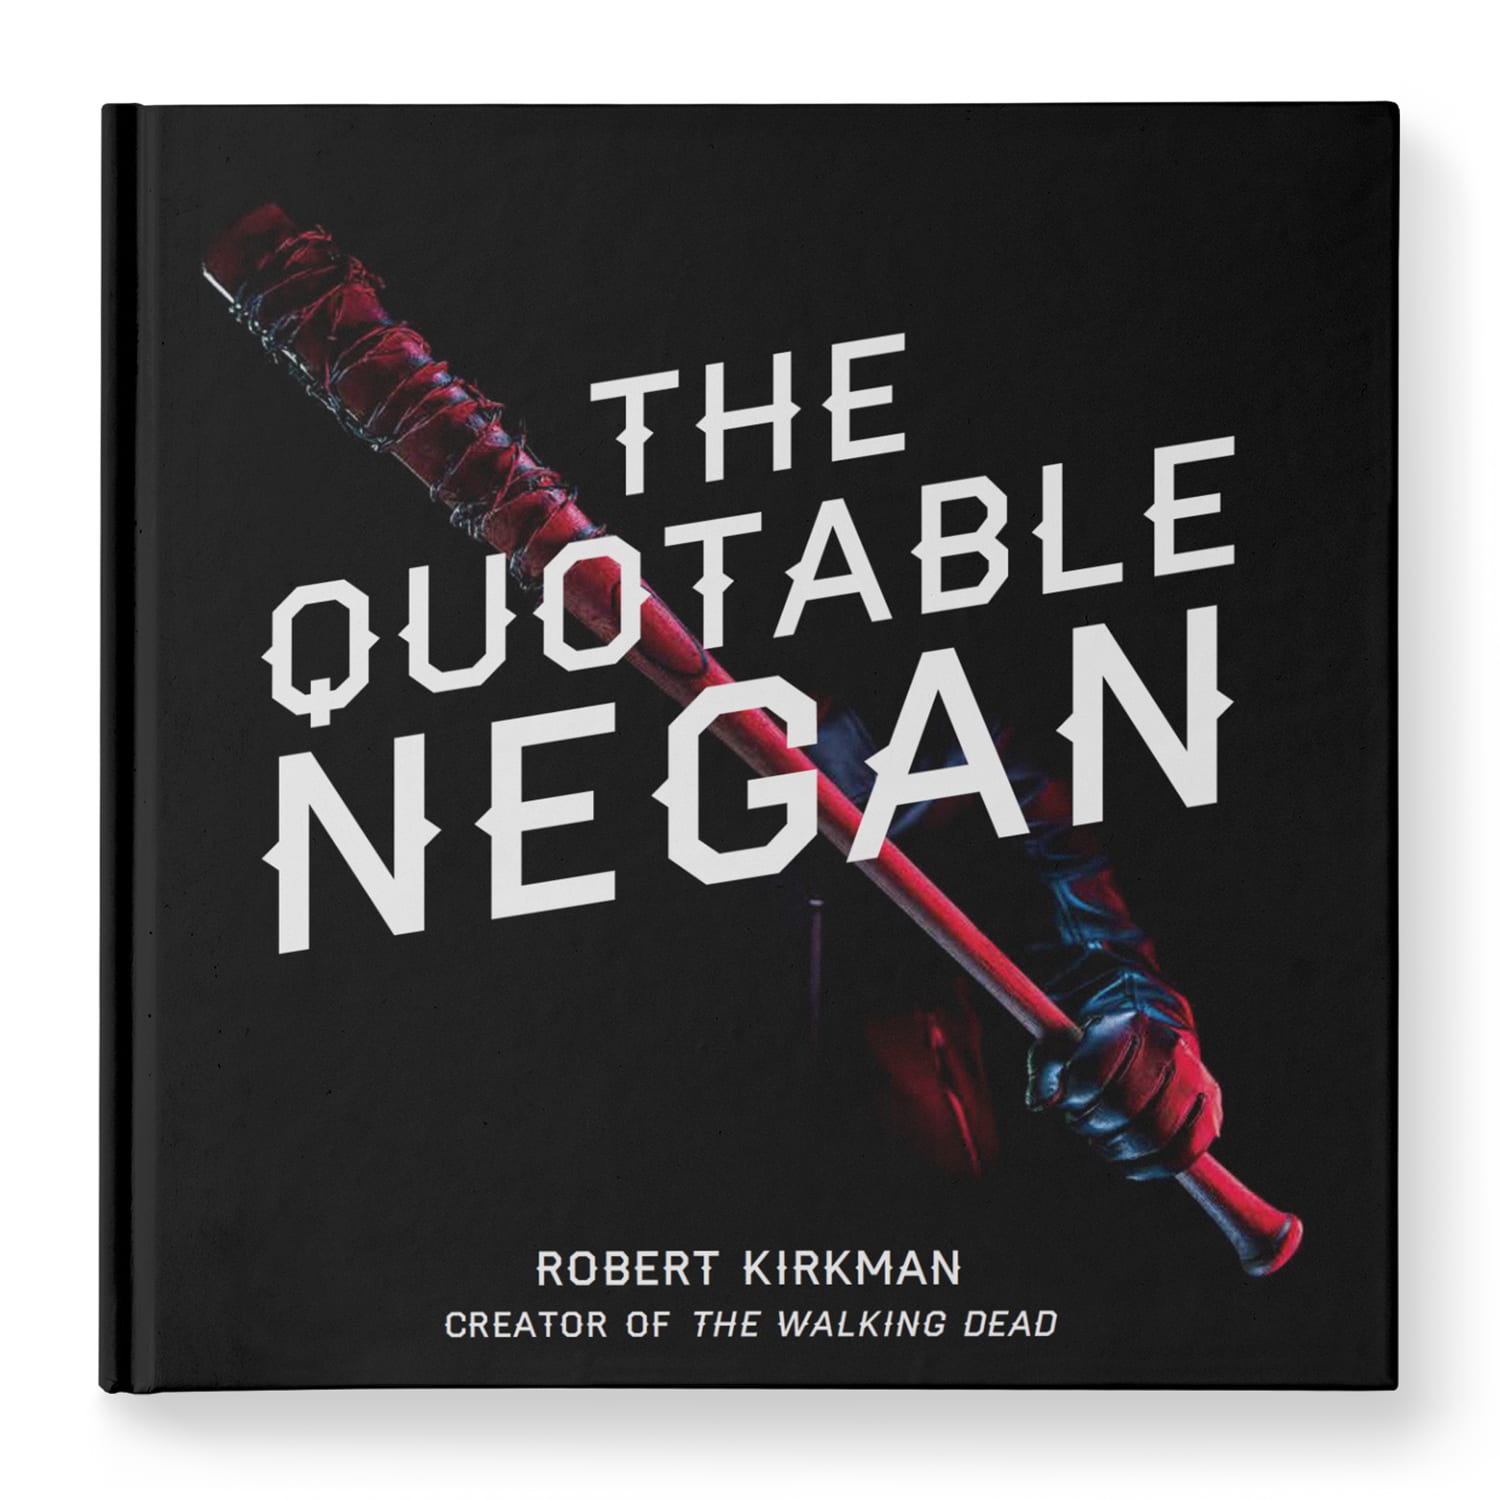 The Walking Dead "The Quotable Negan" - Hardcover Book